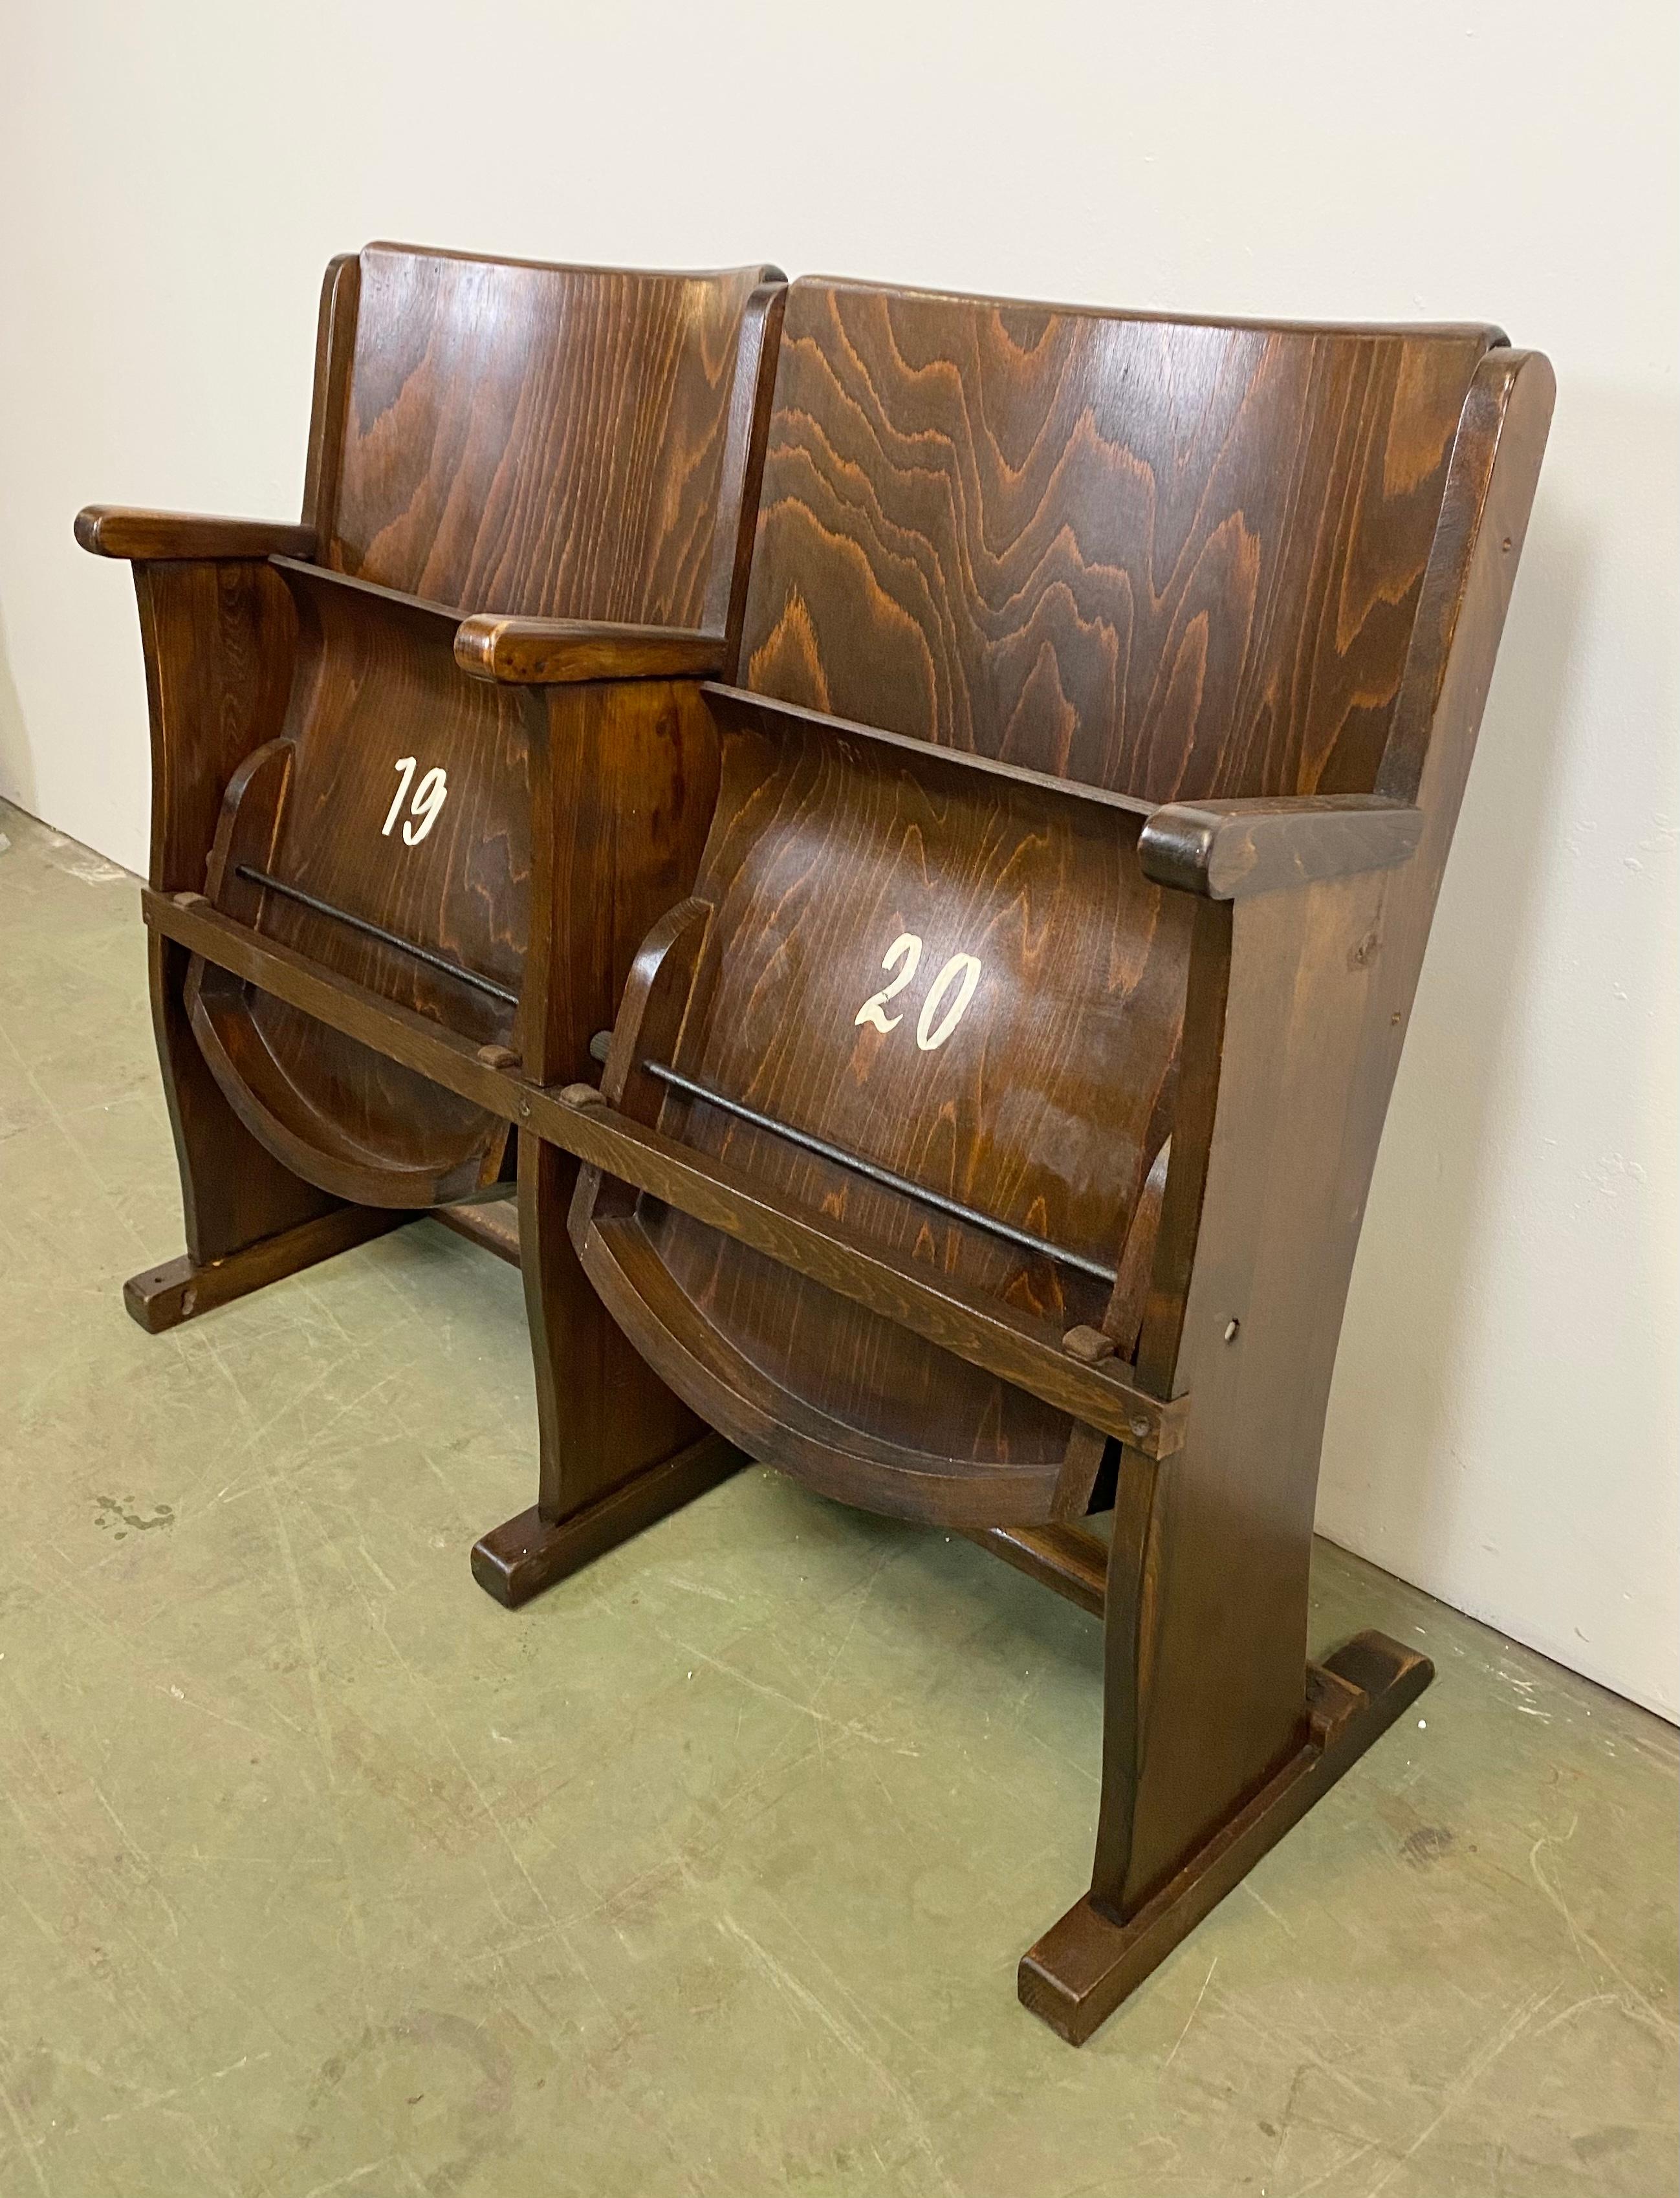 This two-seat cinema bench was produced by Ton (former Thonet) in Czechoslovakia during the 1950s. The chairs are stabile and can be placed anywhere. It is completely made of wood (partly solid wood, partly plywood). The seats fold upwards. The